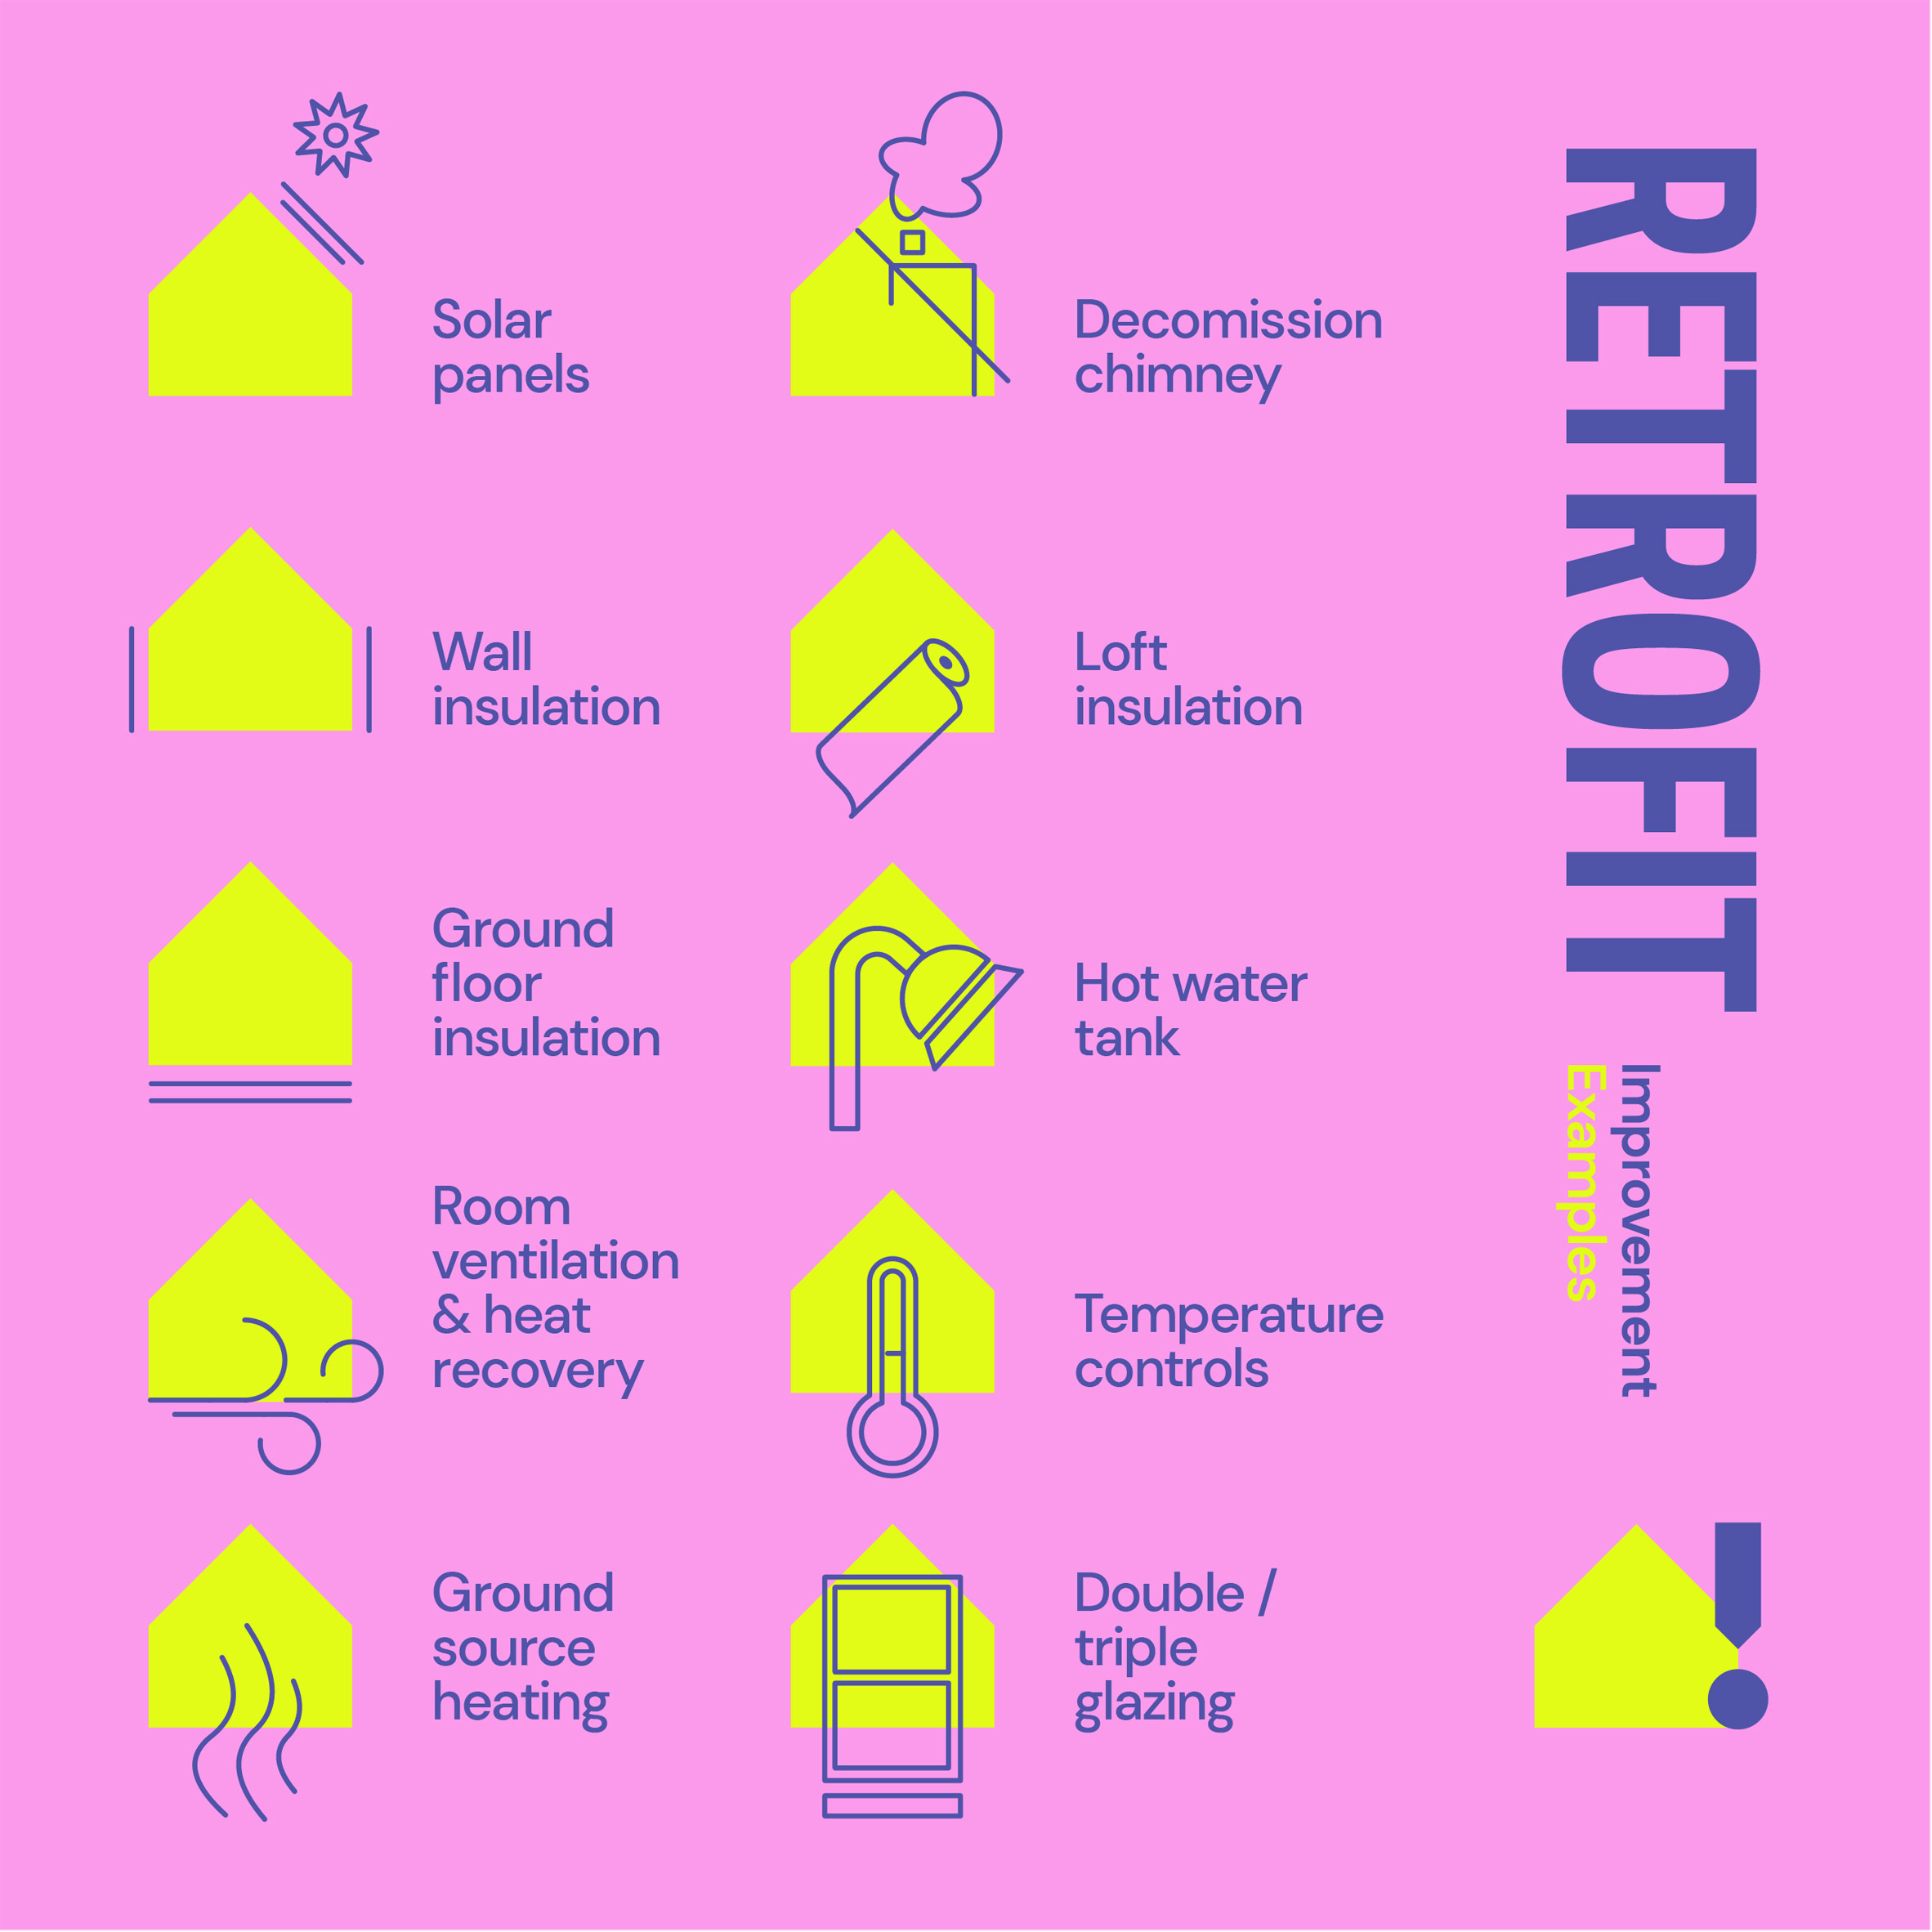 Call for a national retrofit strategy